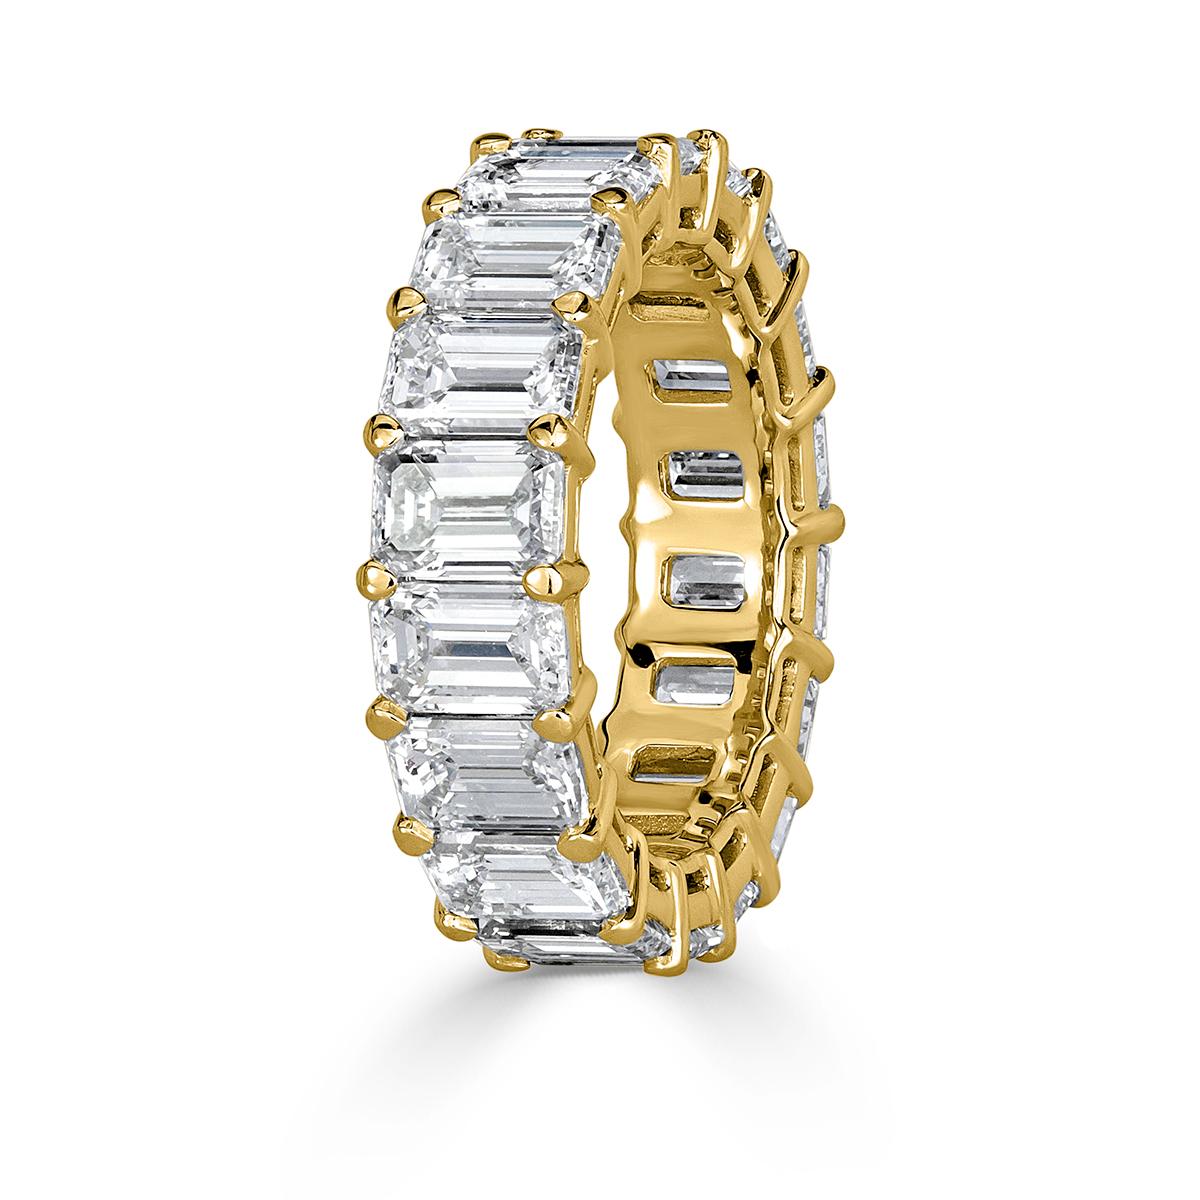 Handcrafted in 18k yellow gold, this stunning diamond eternity band showcases 9.09ct of impeccably matched emerald cut diamonds graded at E-F in color, VVS1-VVS2 in clarity. They are absolutely white and clear with each of the diamonds hand selected